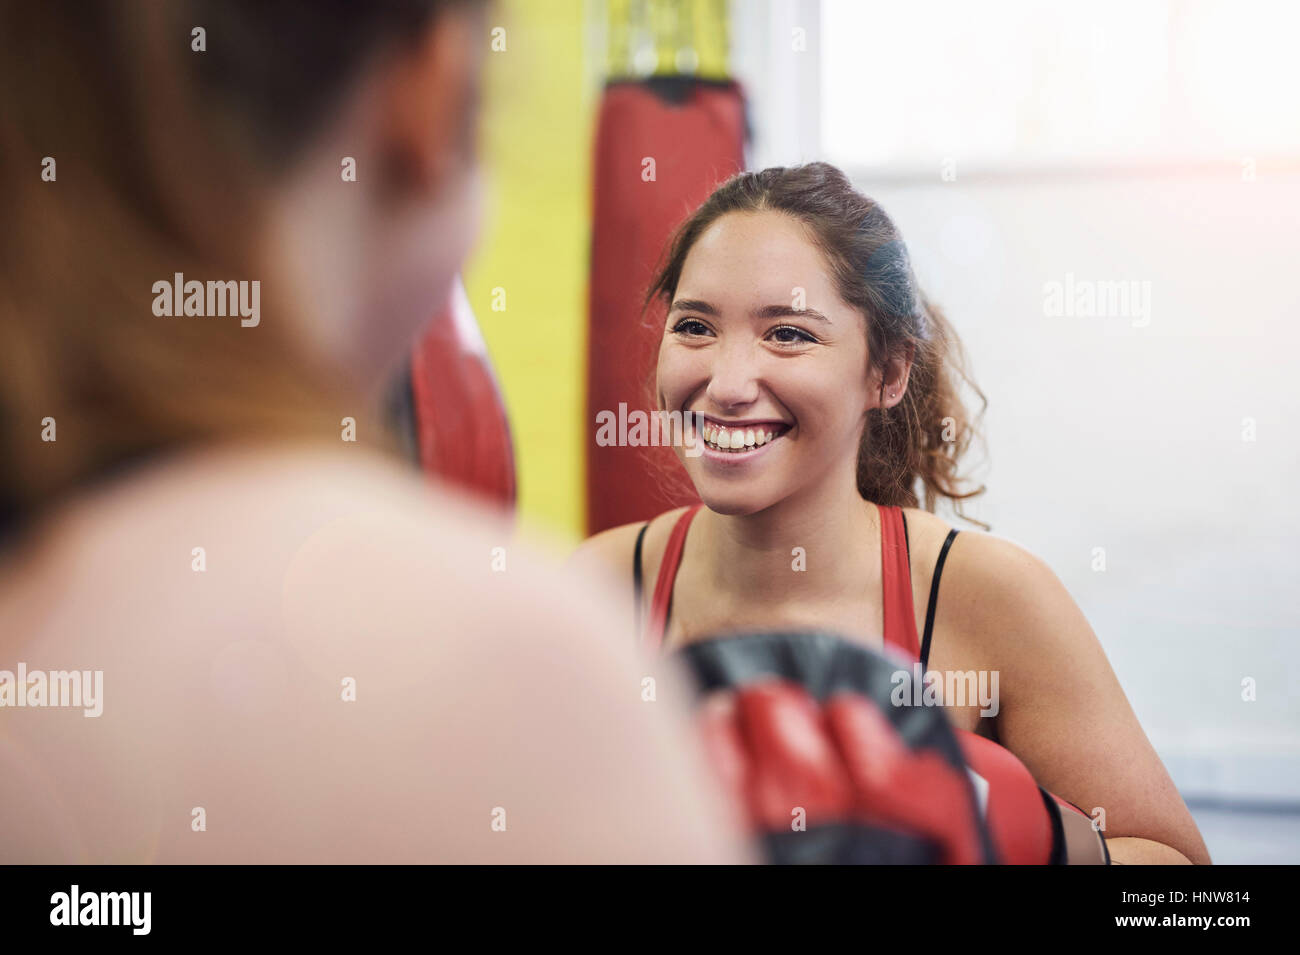 Over shoulder view of female boxer training, punching teammates punch mitt Stock Photo